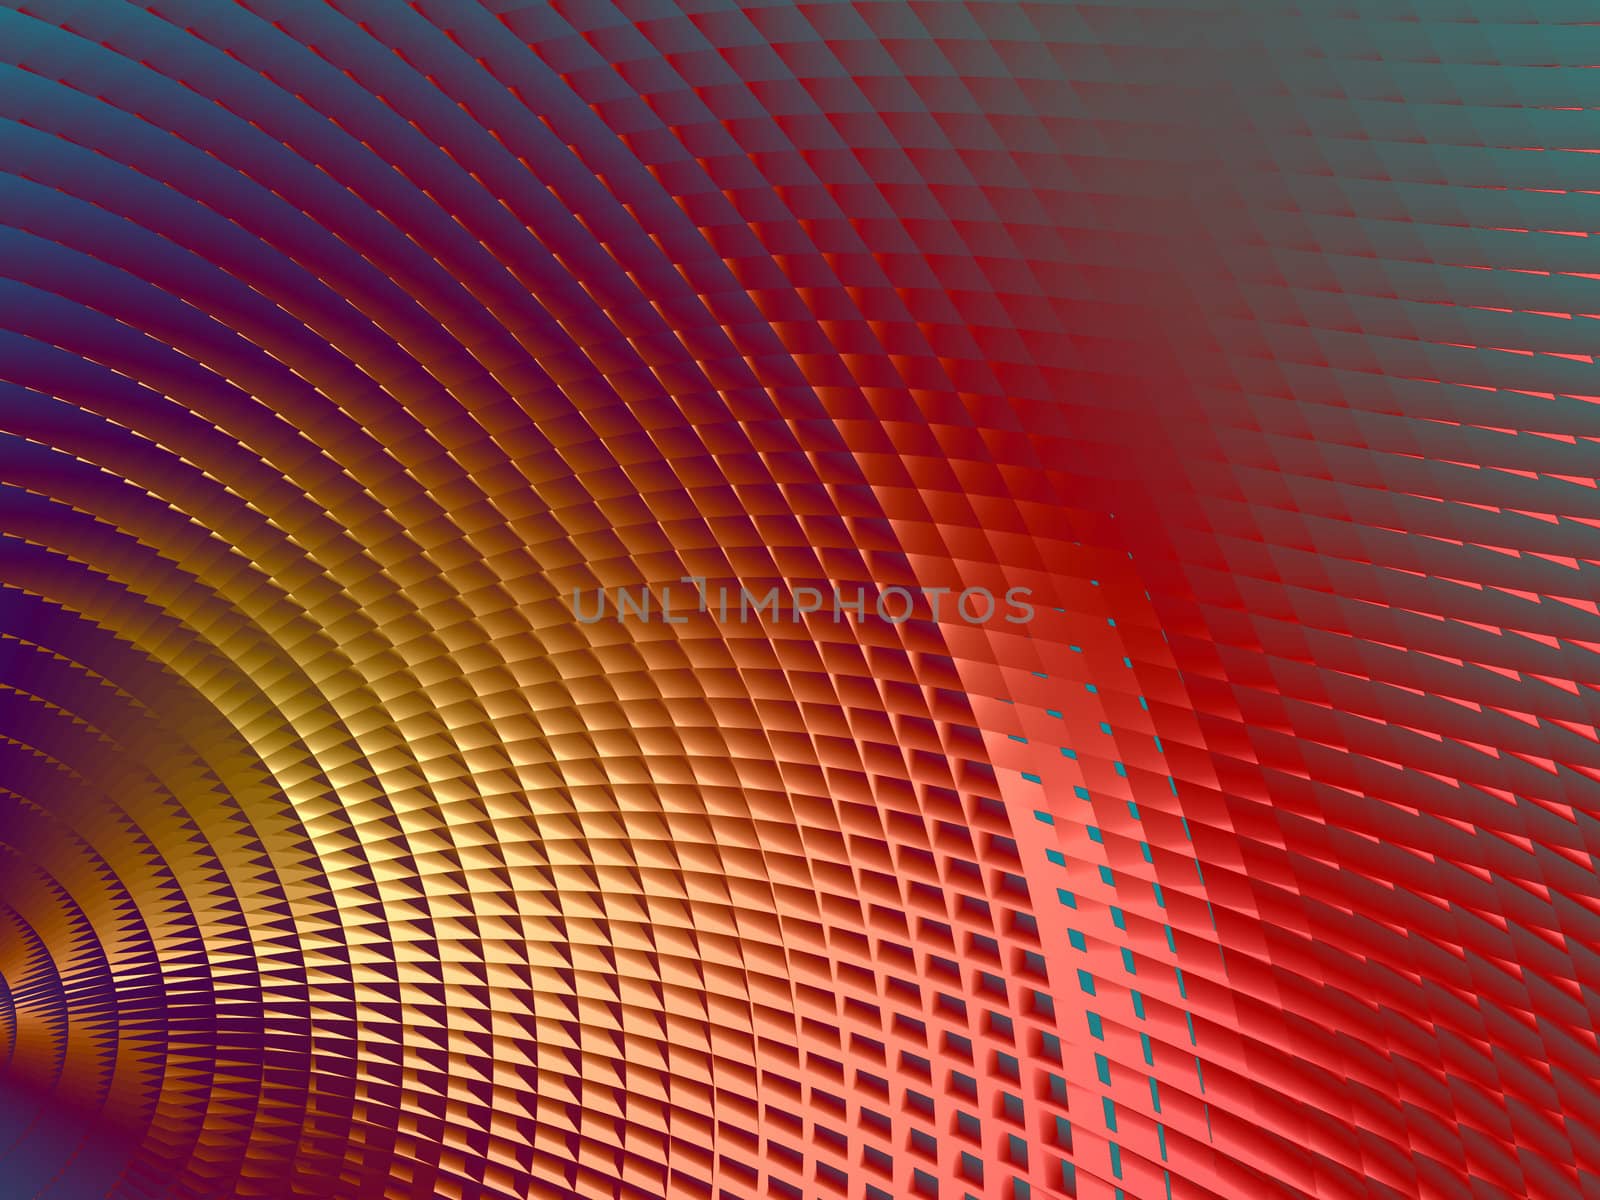 Rendering of section of metallic three dimensional circular mesh suitable as a background screen